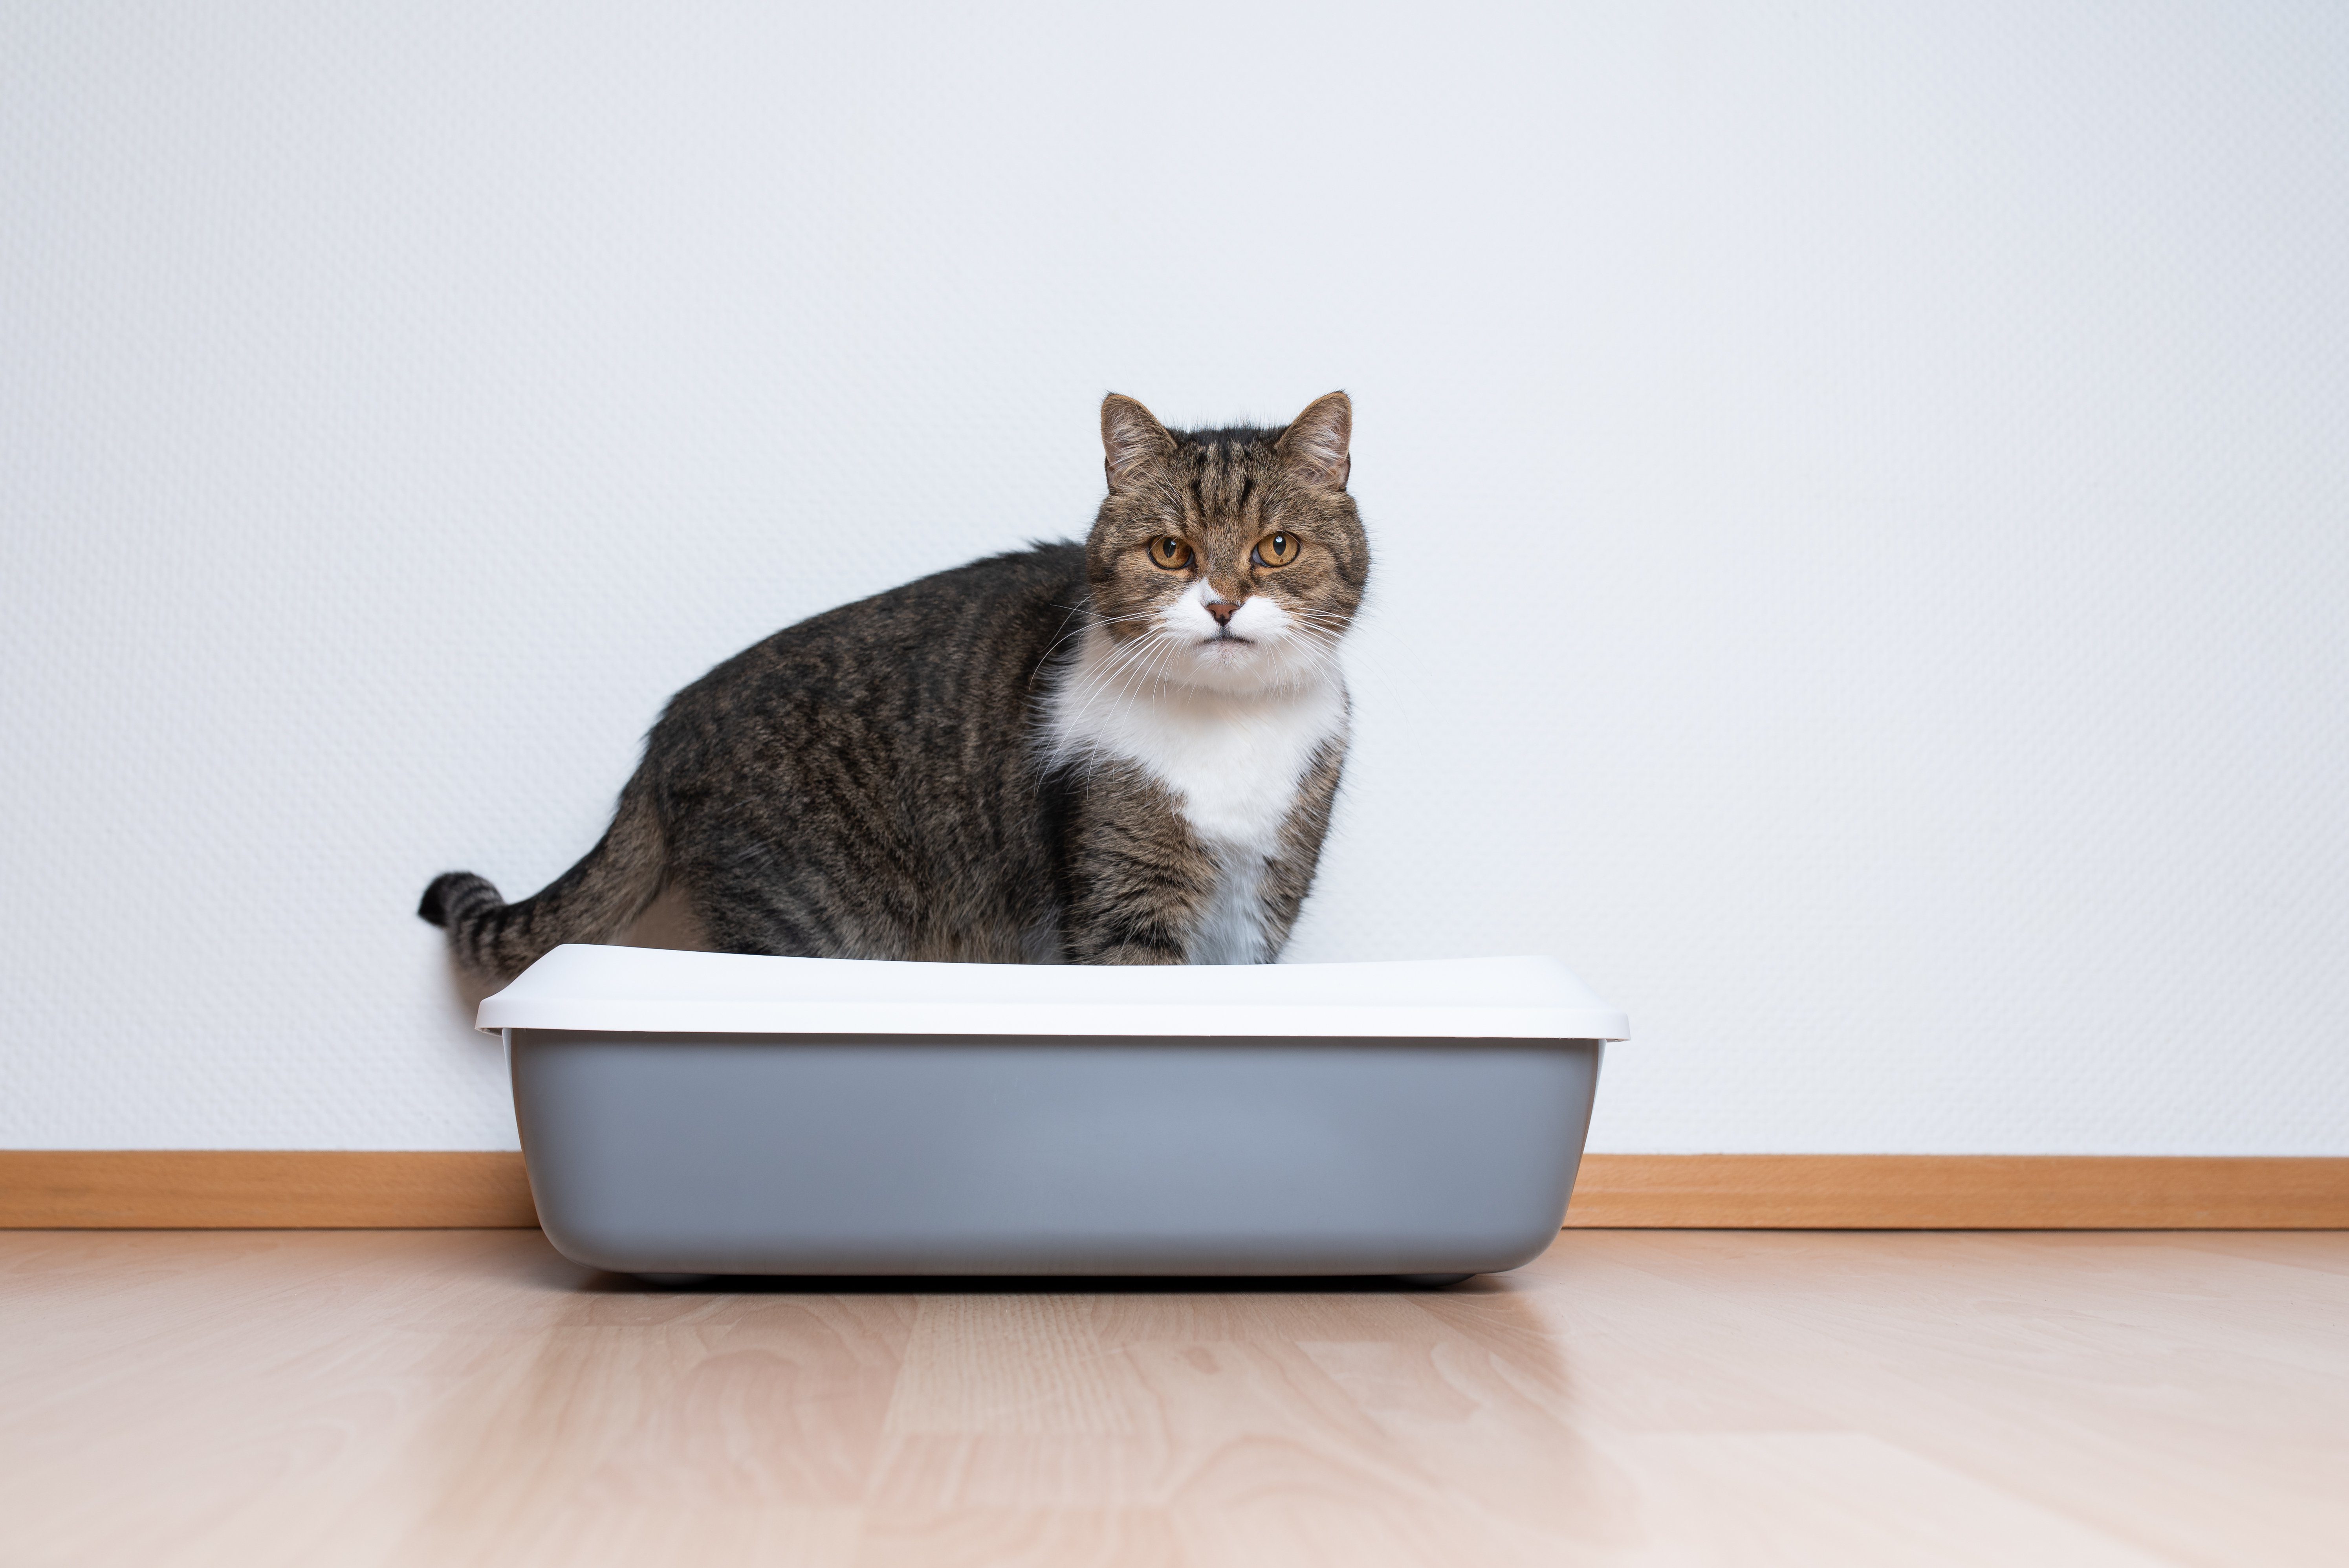 side view of a tabby british shorthair cat using a cat litter box in front of white wall with copy space looking at camera